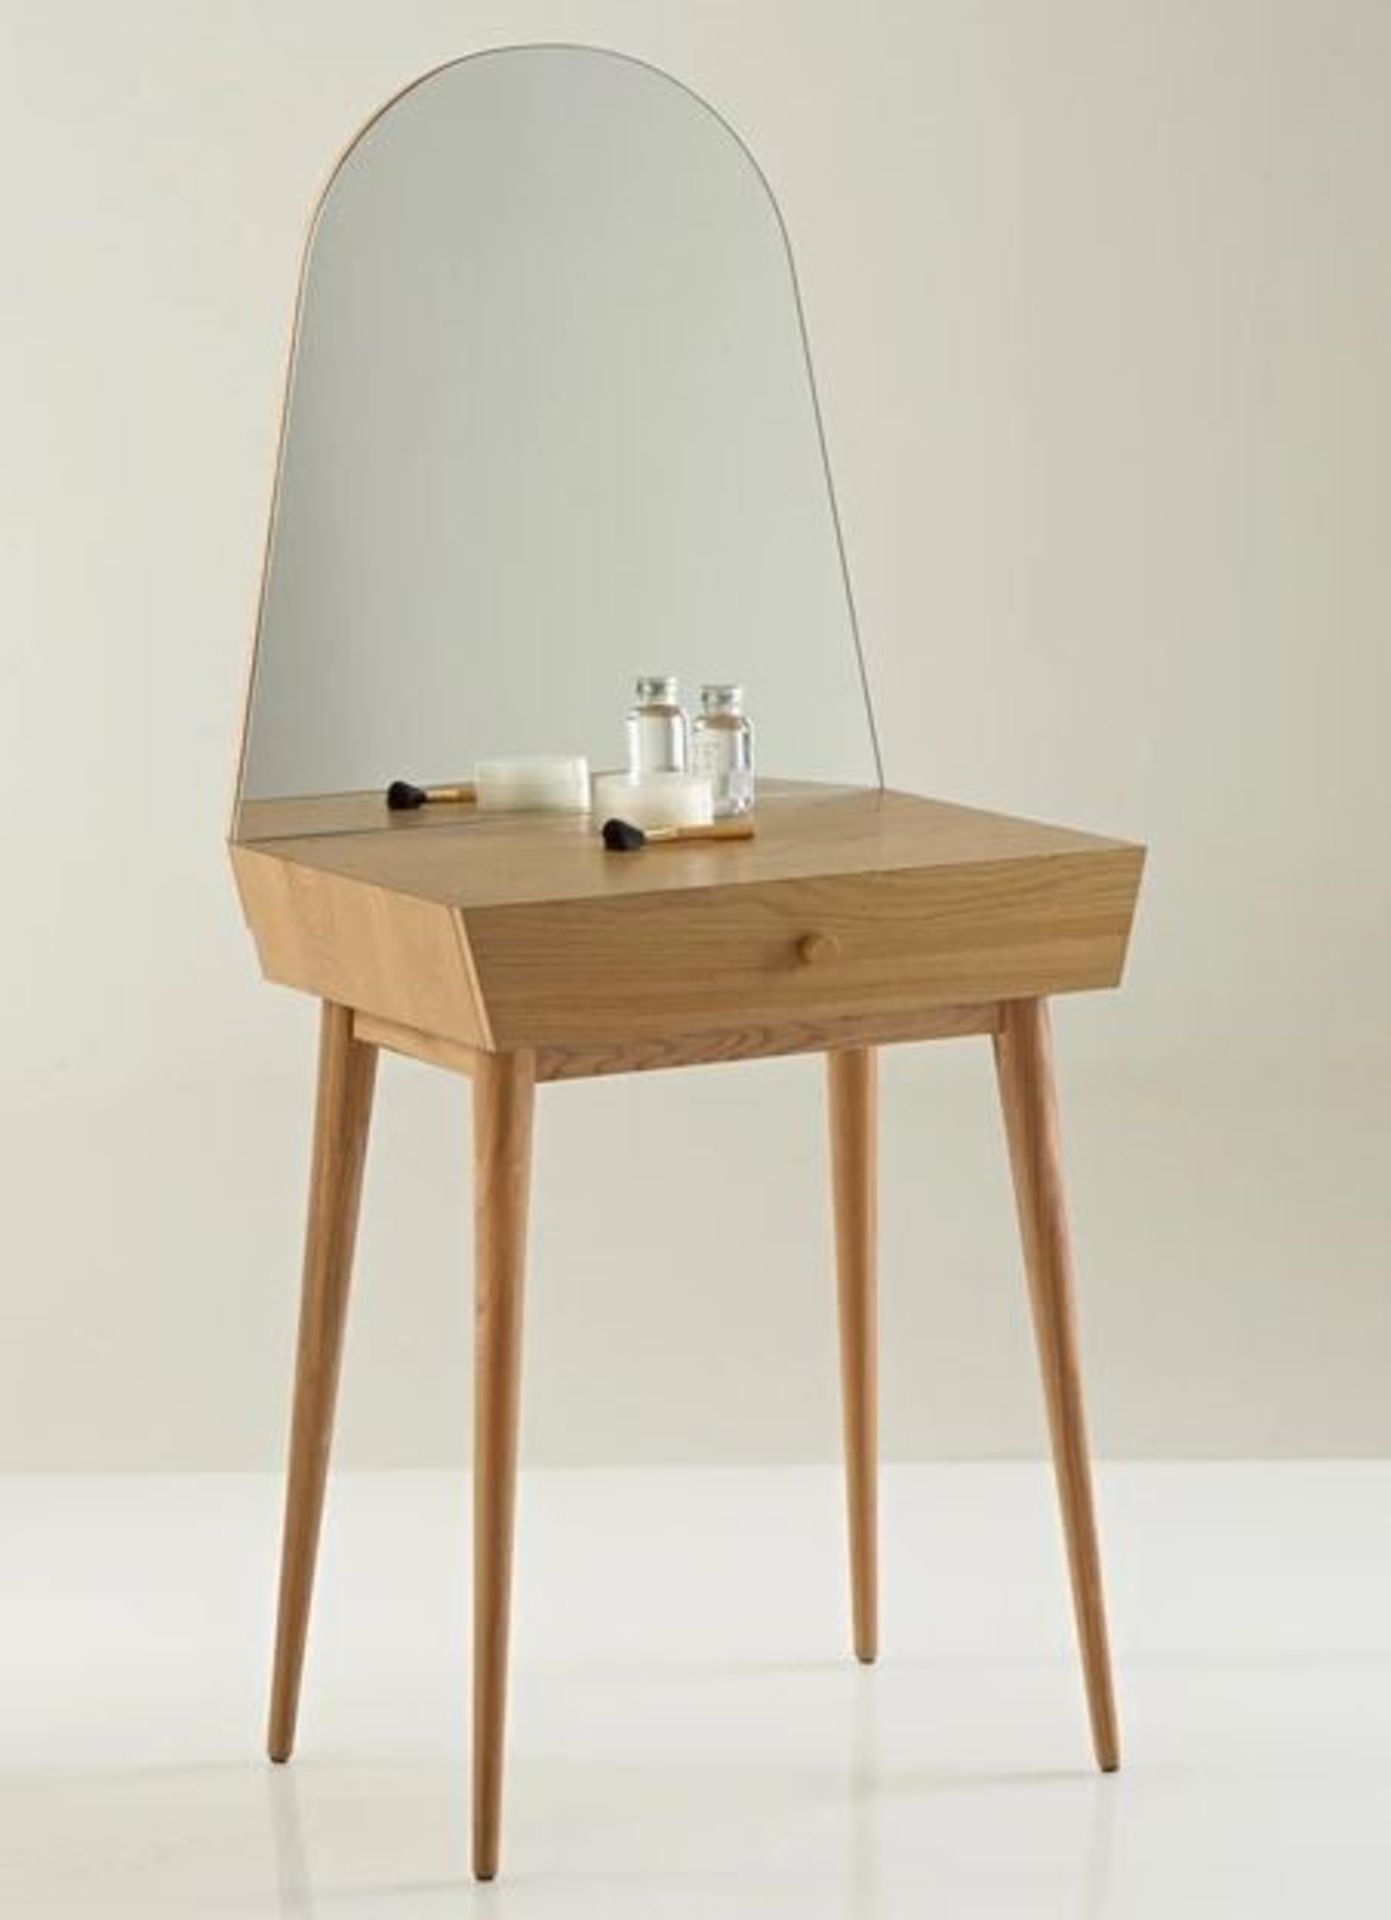 1 GRADE B CLAIROY 1 DRAWER SCANDI-STYLE DRESSING TABLE / PLEASE NOTE TABLE DOES NOT COME WITH MIRROR